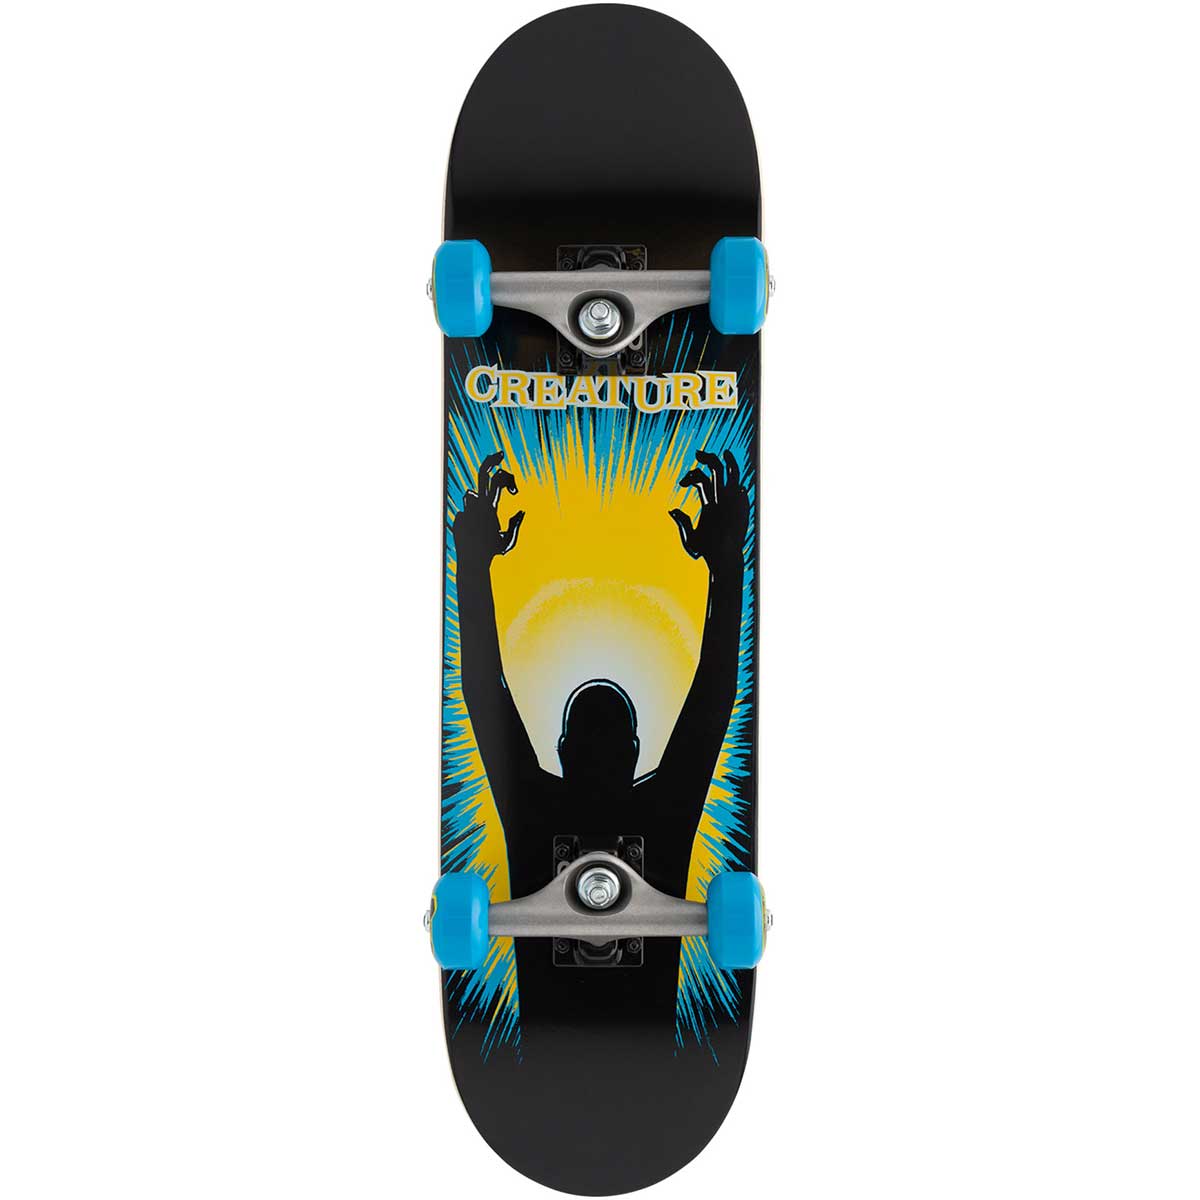 marketing Wierook cilinder Creature The Thing Micro Complete Skateboard - 7.5x28.25 | SoCal Skateshop